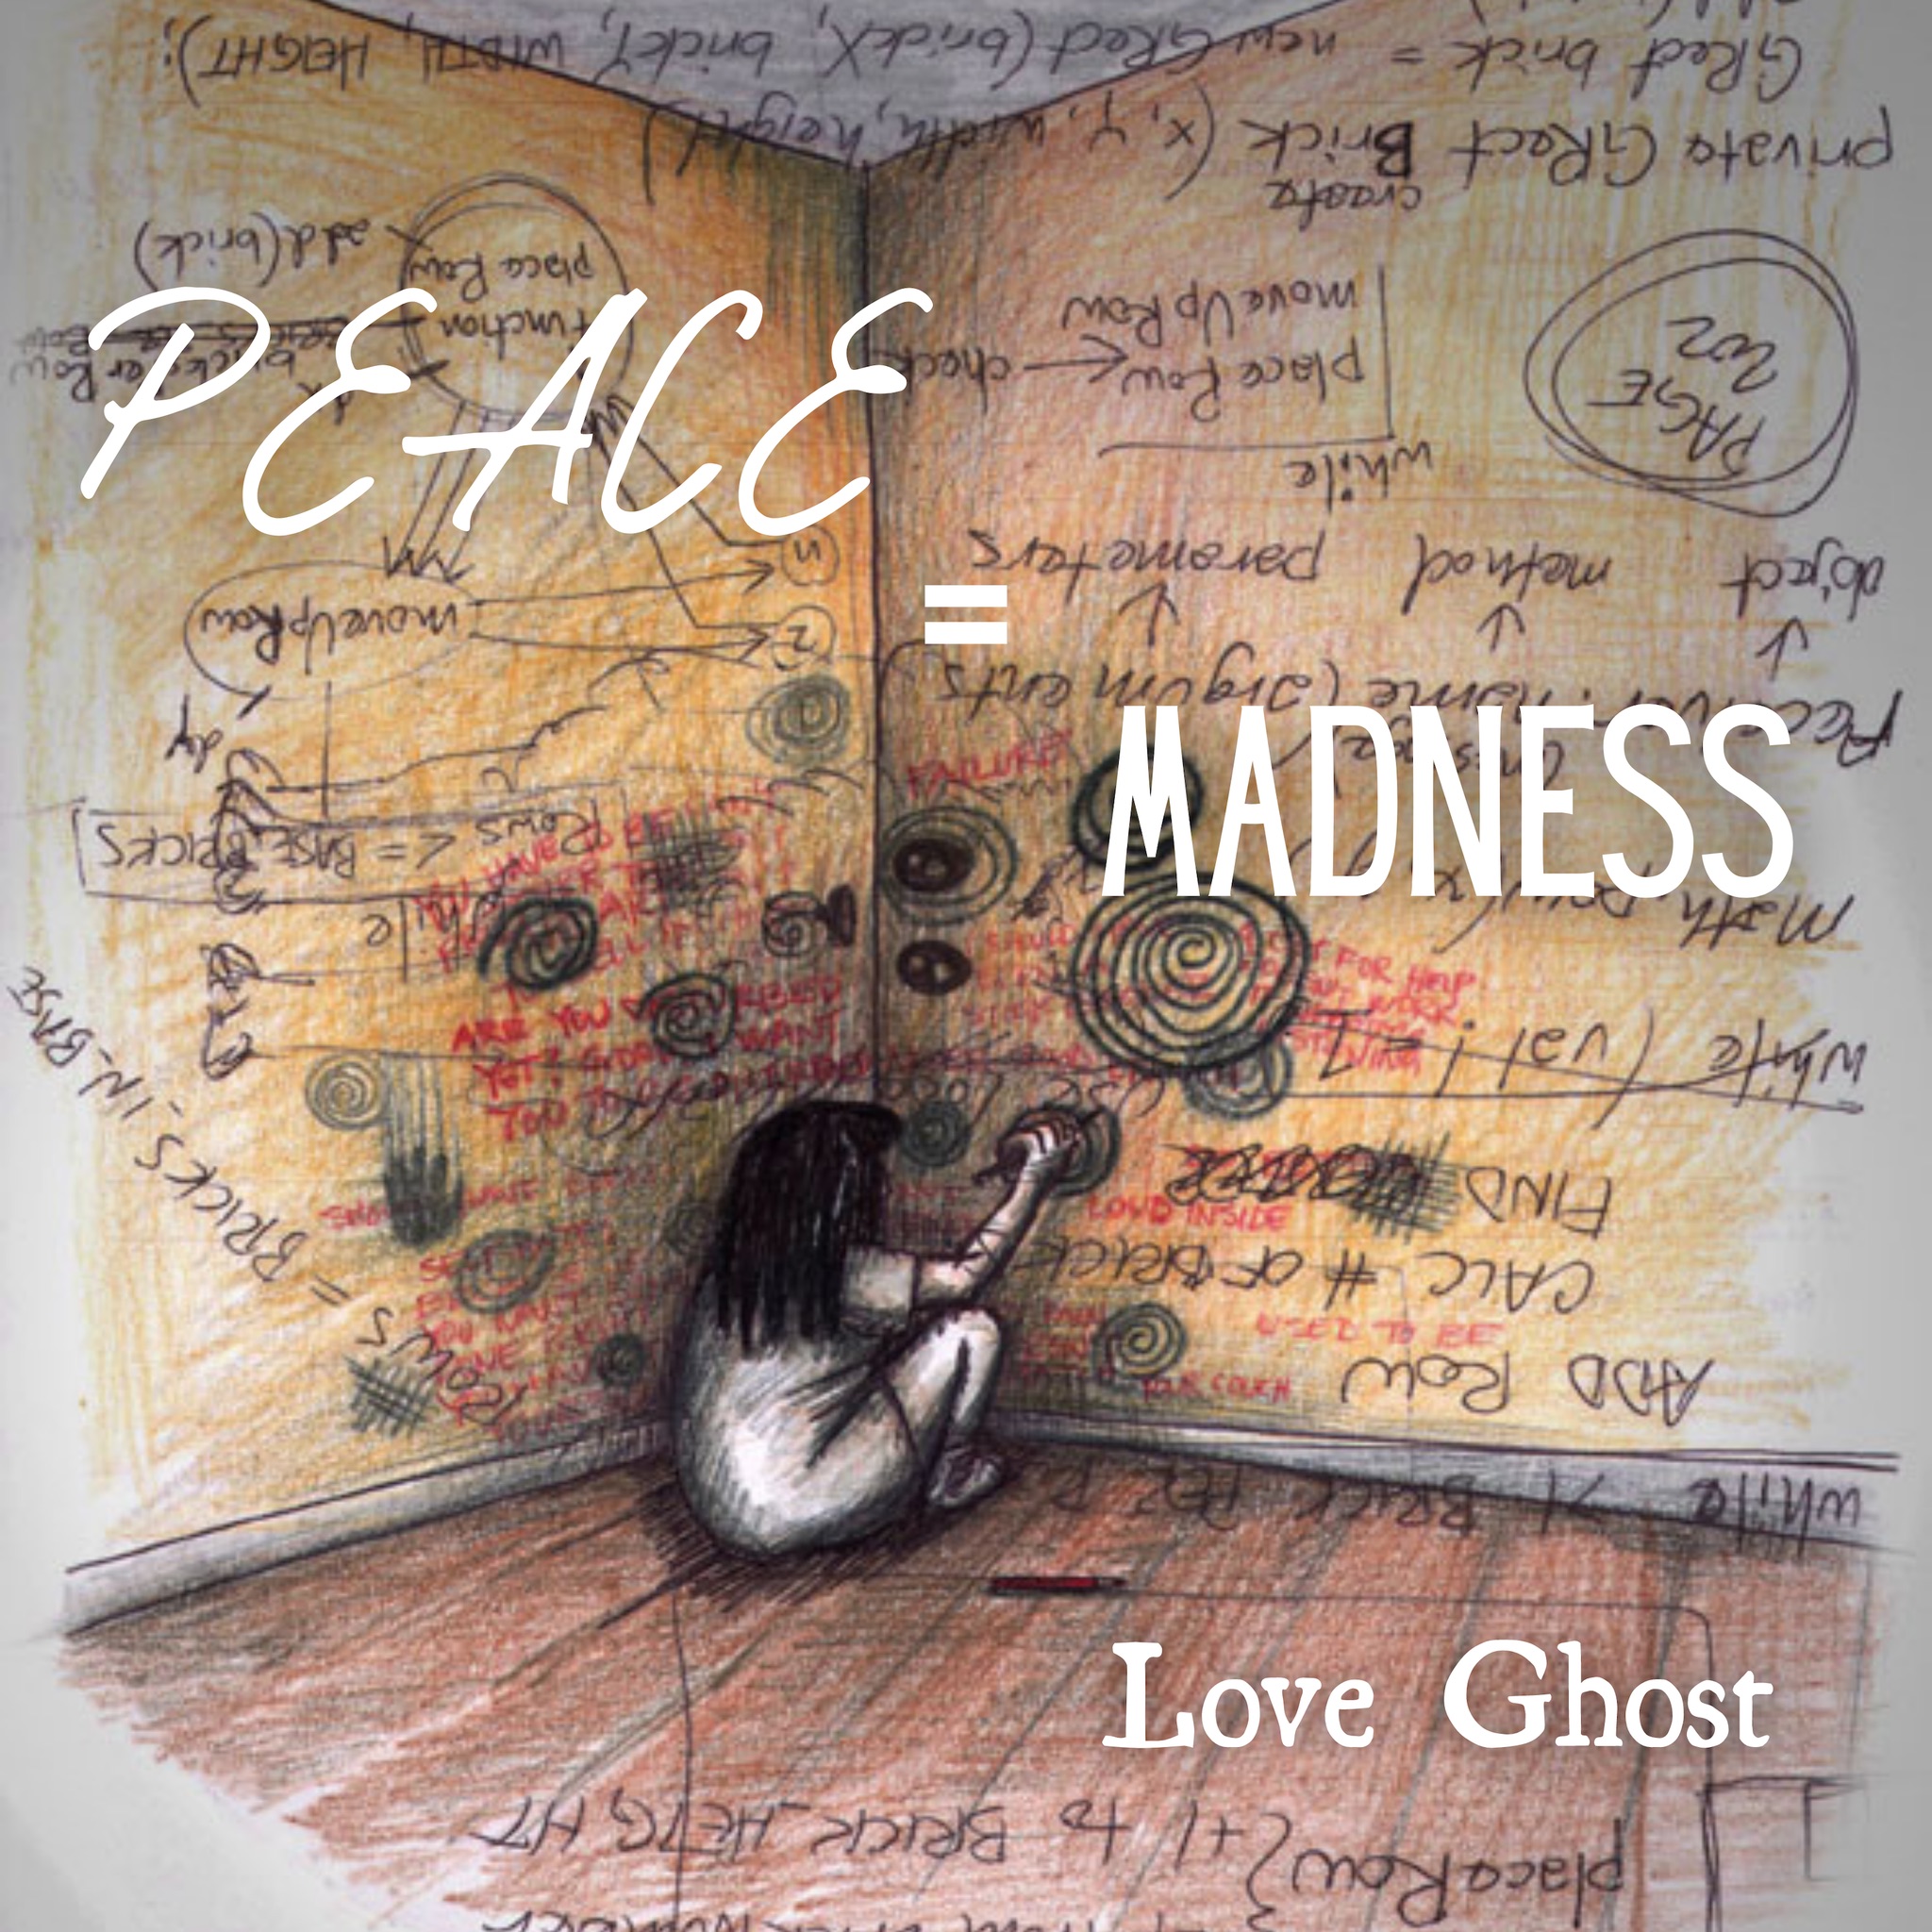 Love Ghost – “Peace=Madness”